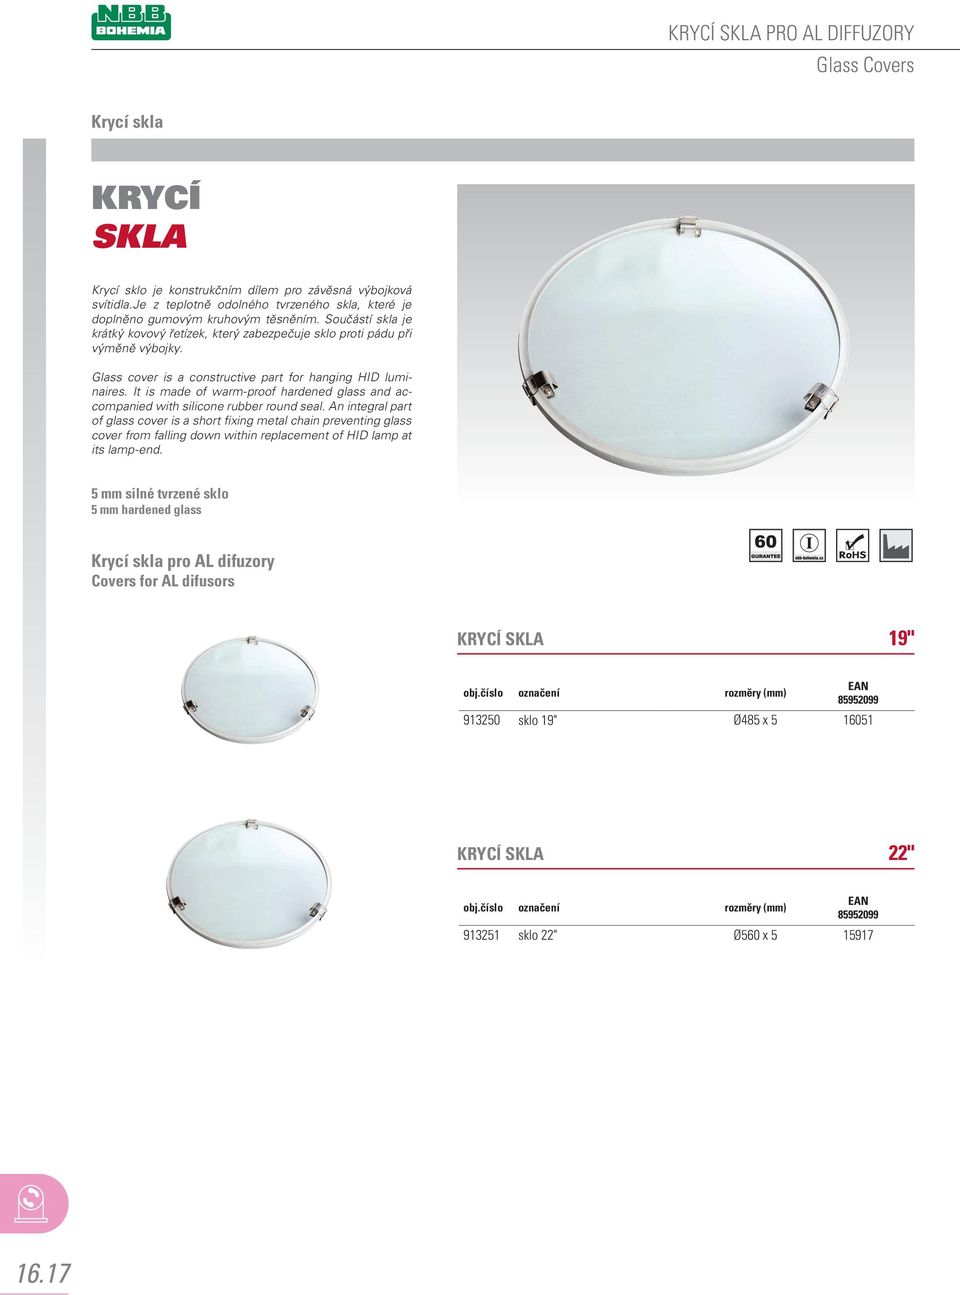 Glass cover is a constructive part for hanging HID luminaires. It is made of warm-proof hardened glass and accompanied with silicone rubber round seal.